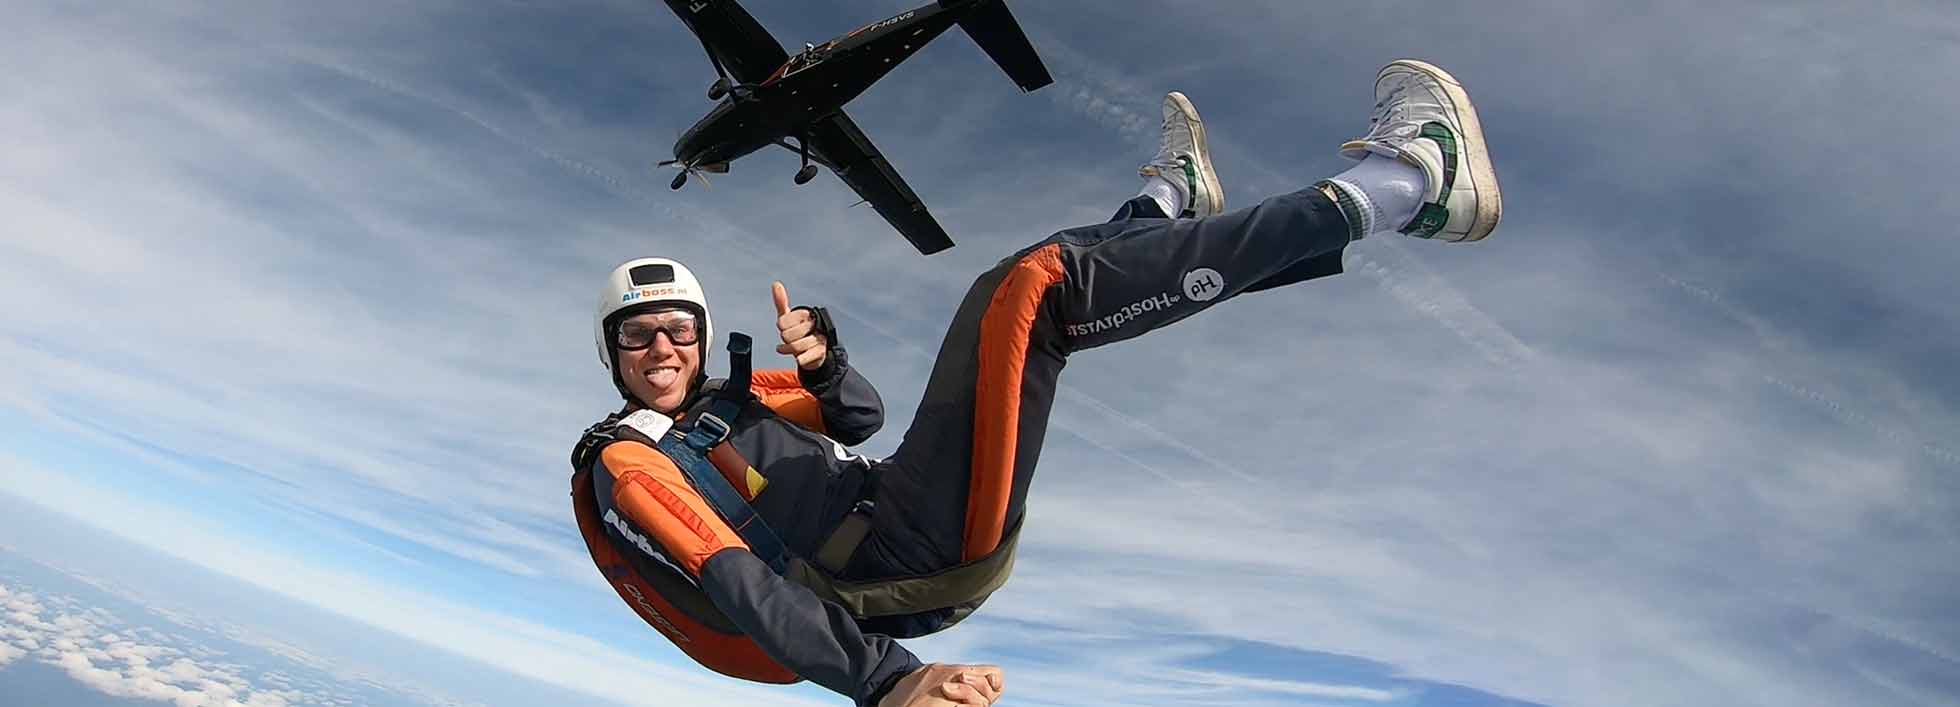 DO YOU WANT TO LEARN SKYDIVING?